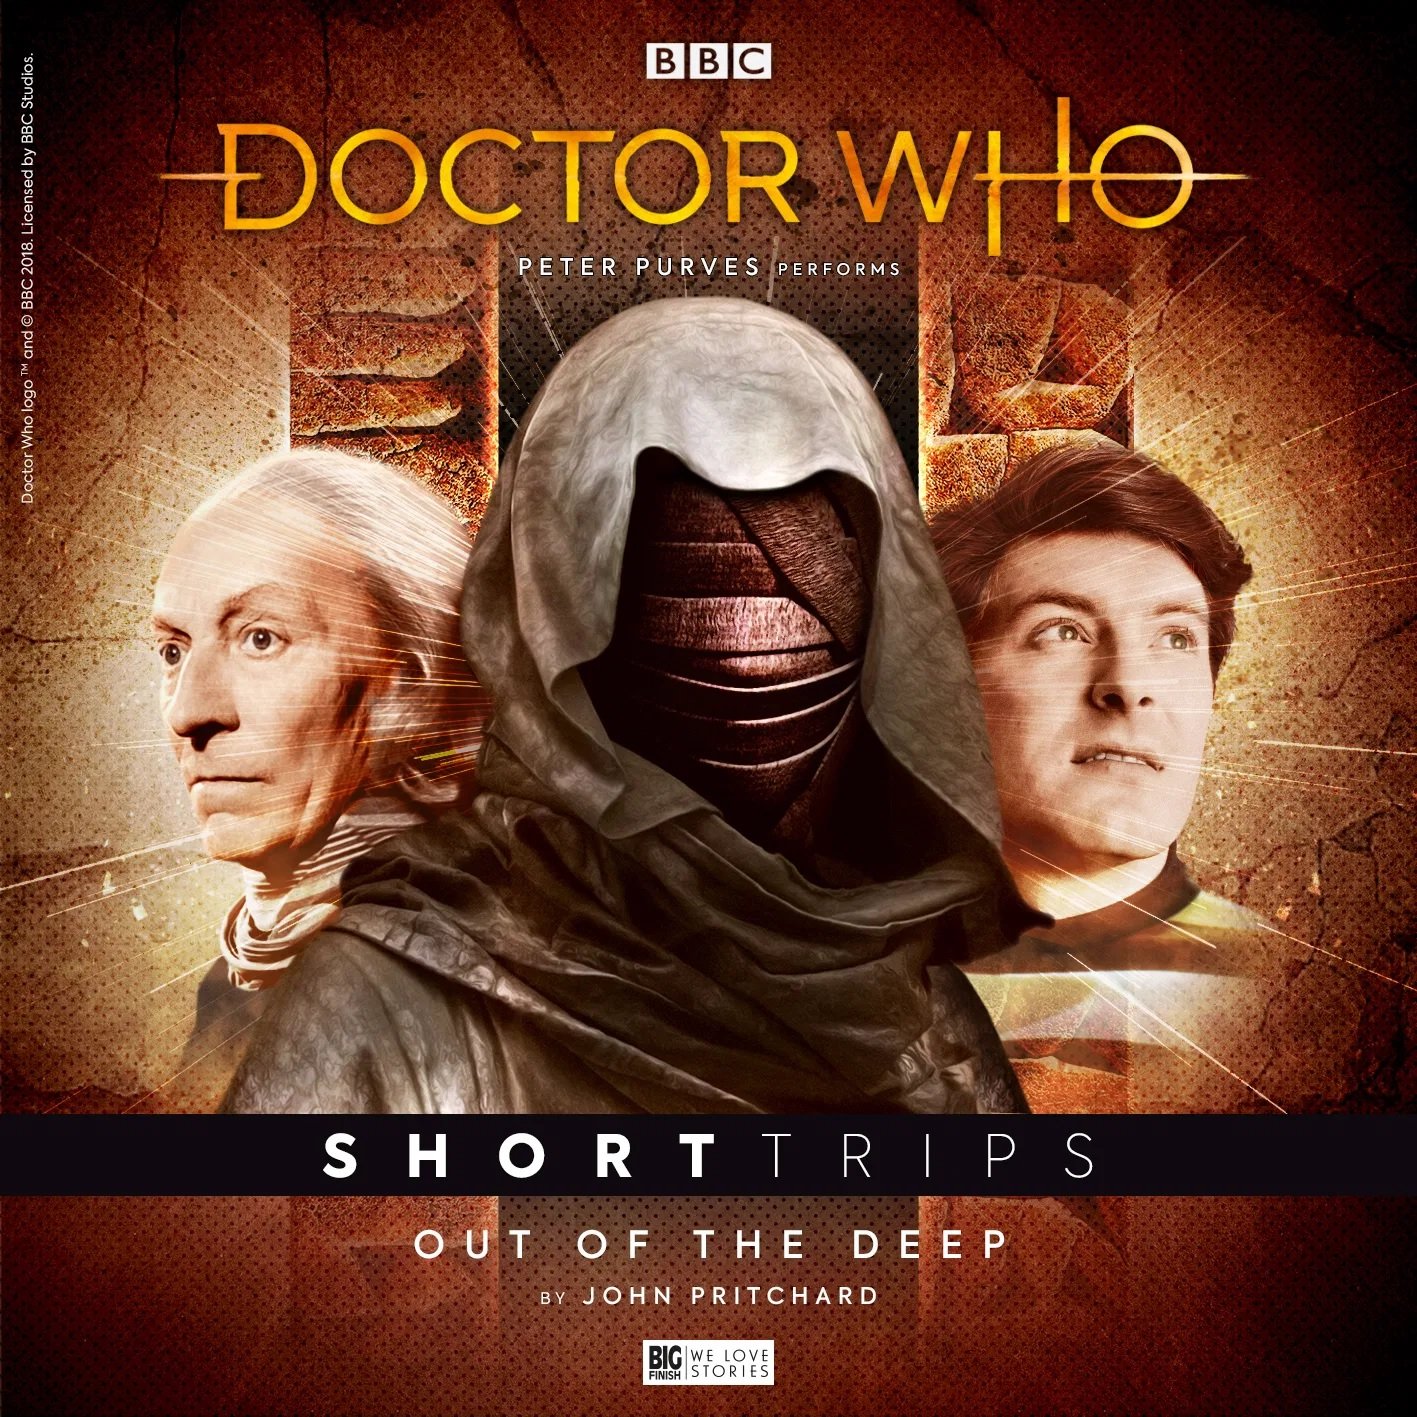 Reviewed: Big Finish’s Doctor Who Short Trips – Out of the Deep